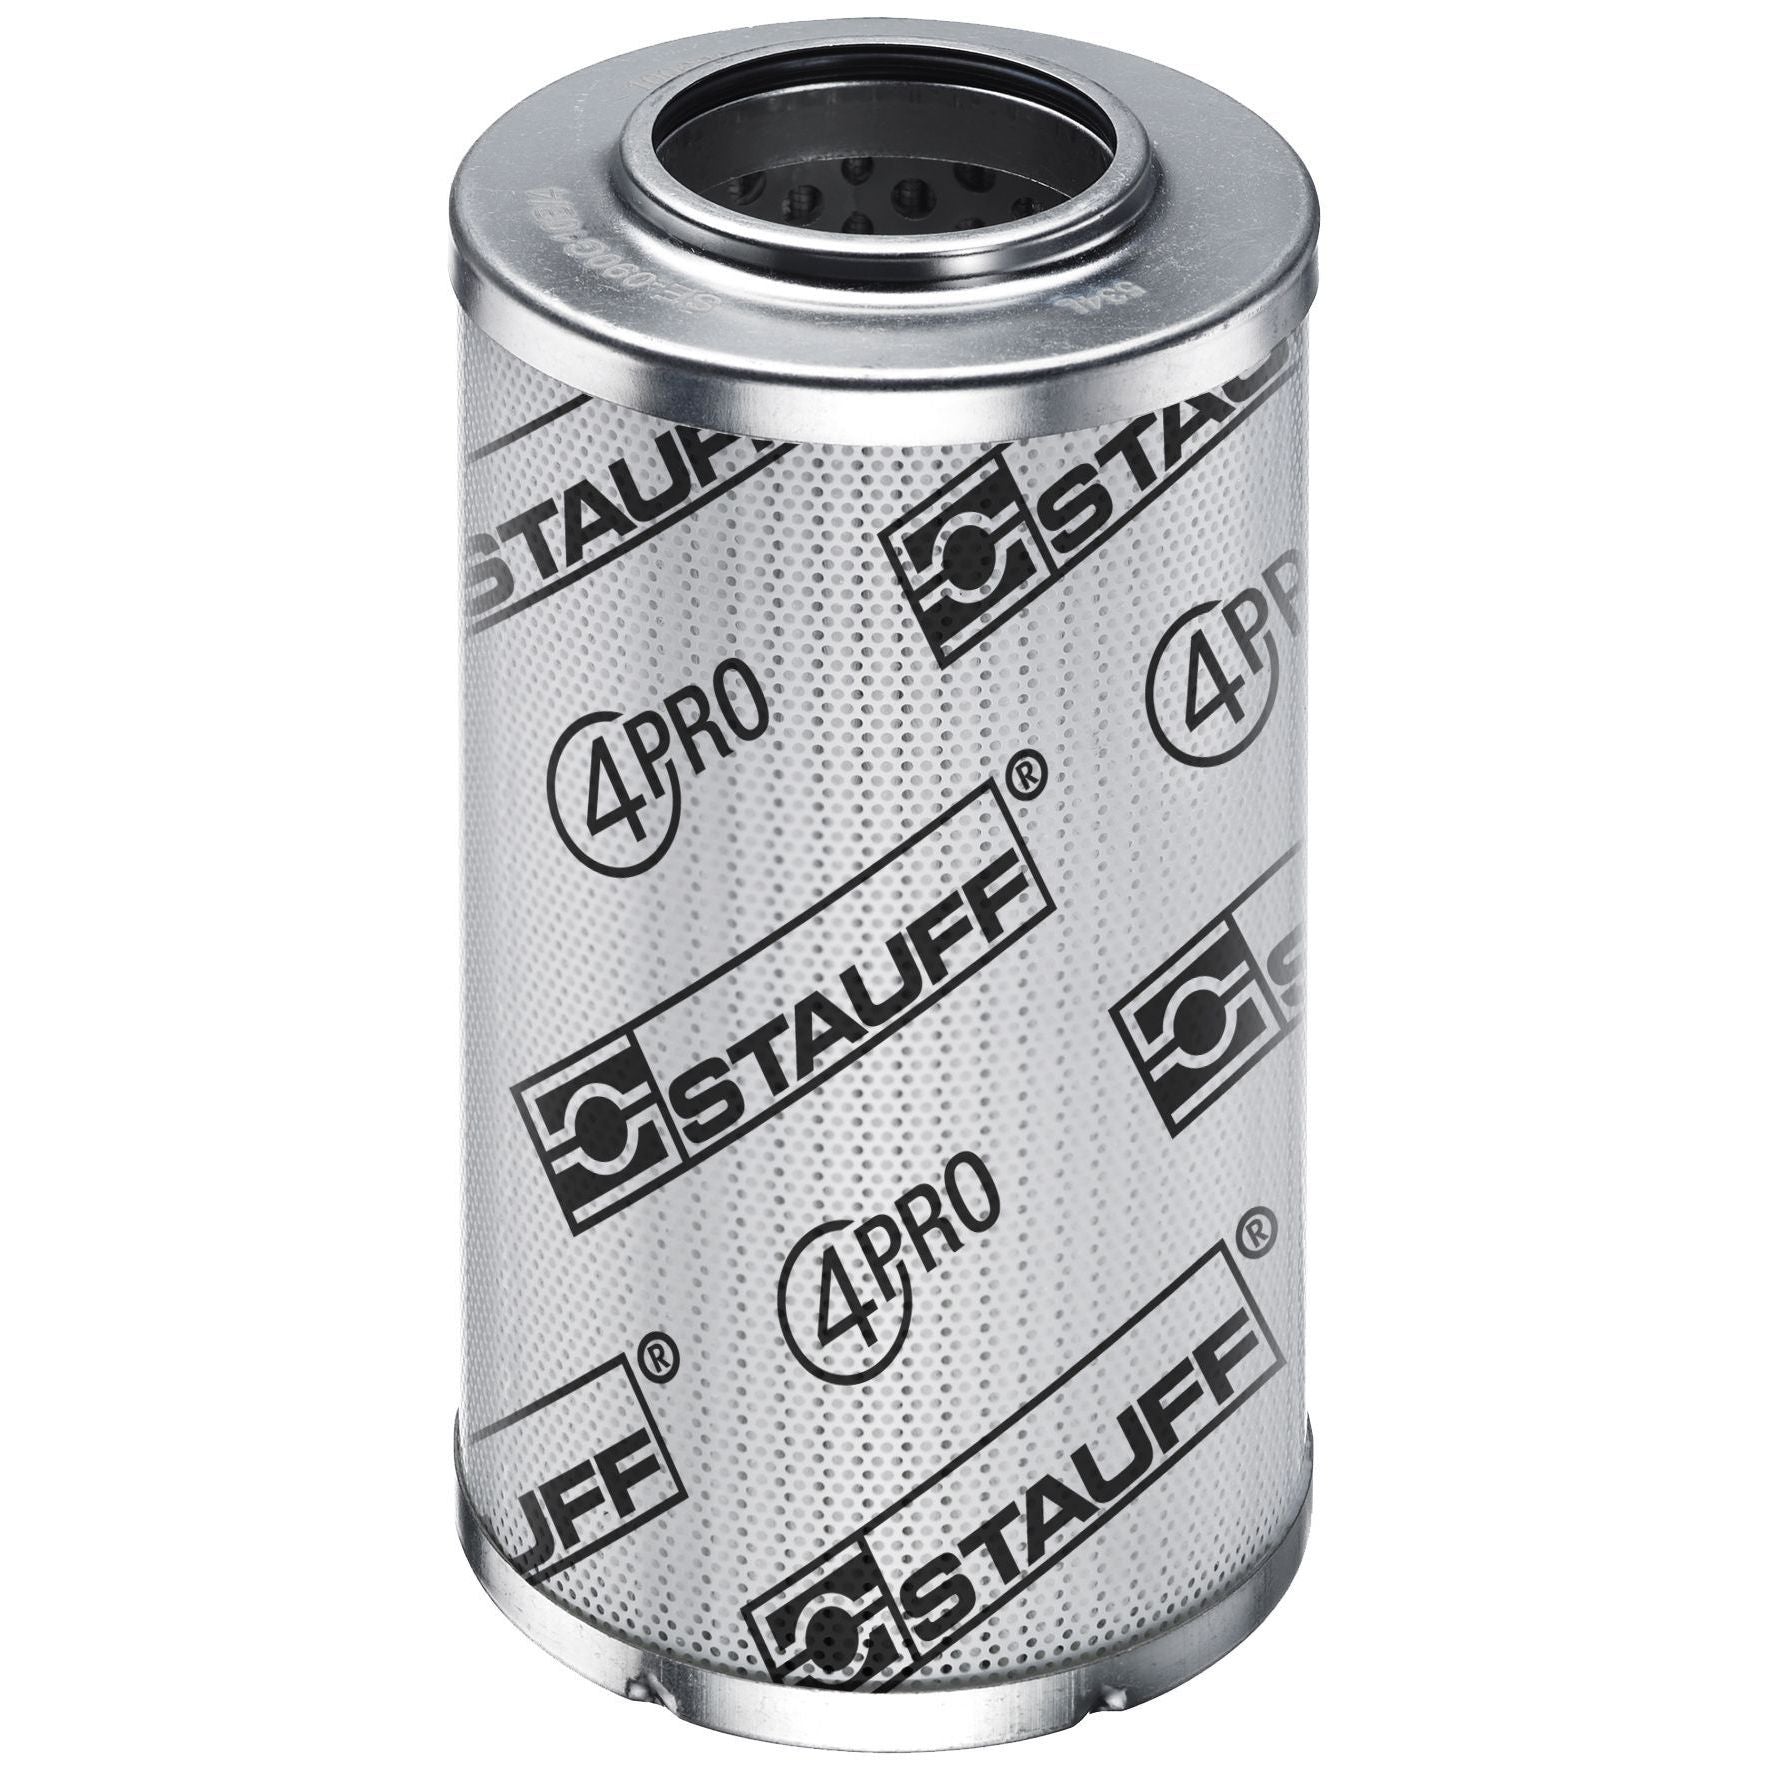 SE-045-G-10-V/4 : Stauff SF-045 Series Filter Element, 10 Micron, Synthetic, 363psi Collapse Differential, Viton Seals